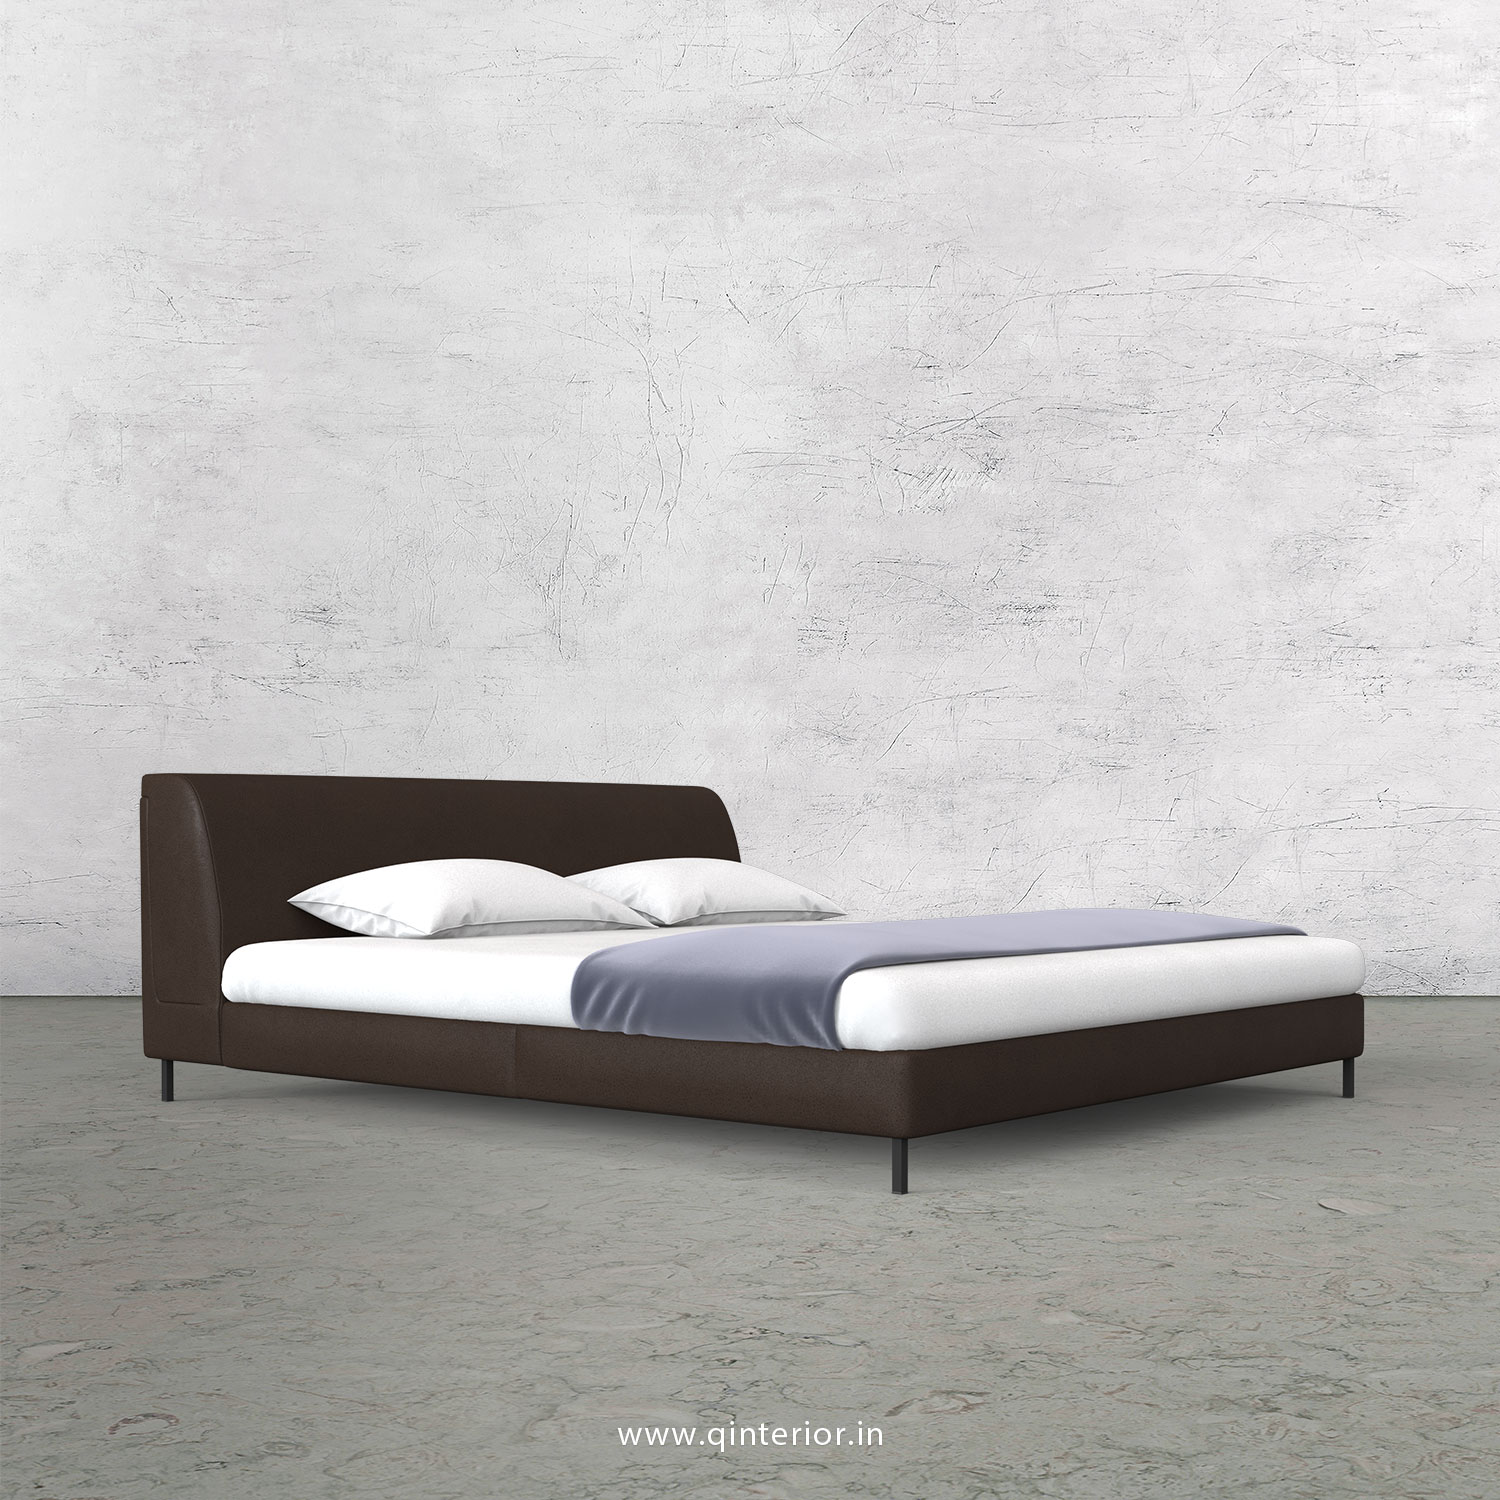 Luxura King Size Bed in Fab Leather Fabric - KBD003 FL16